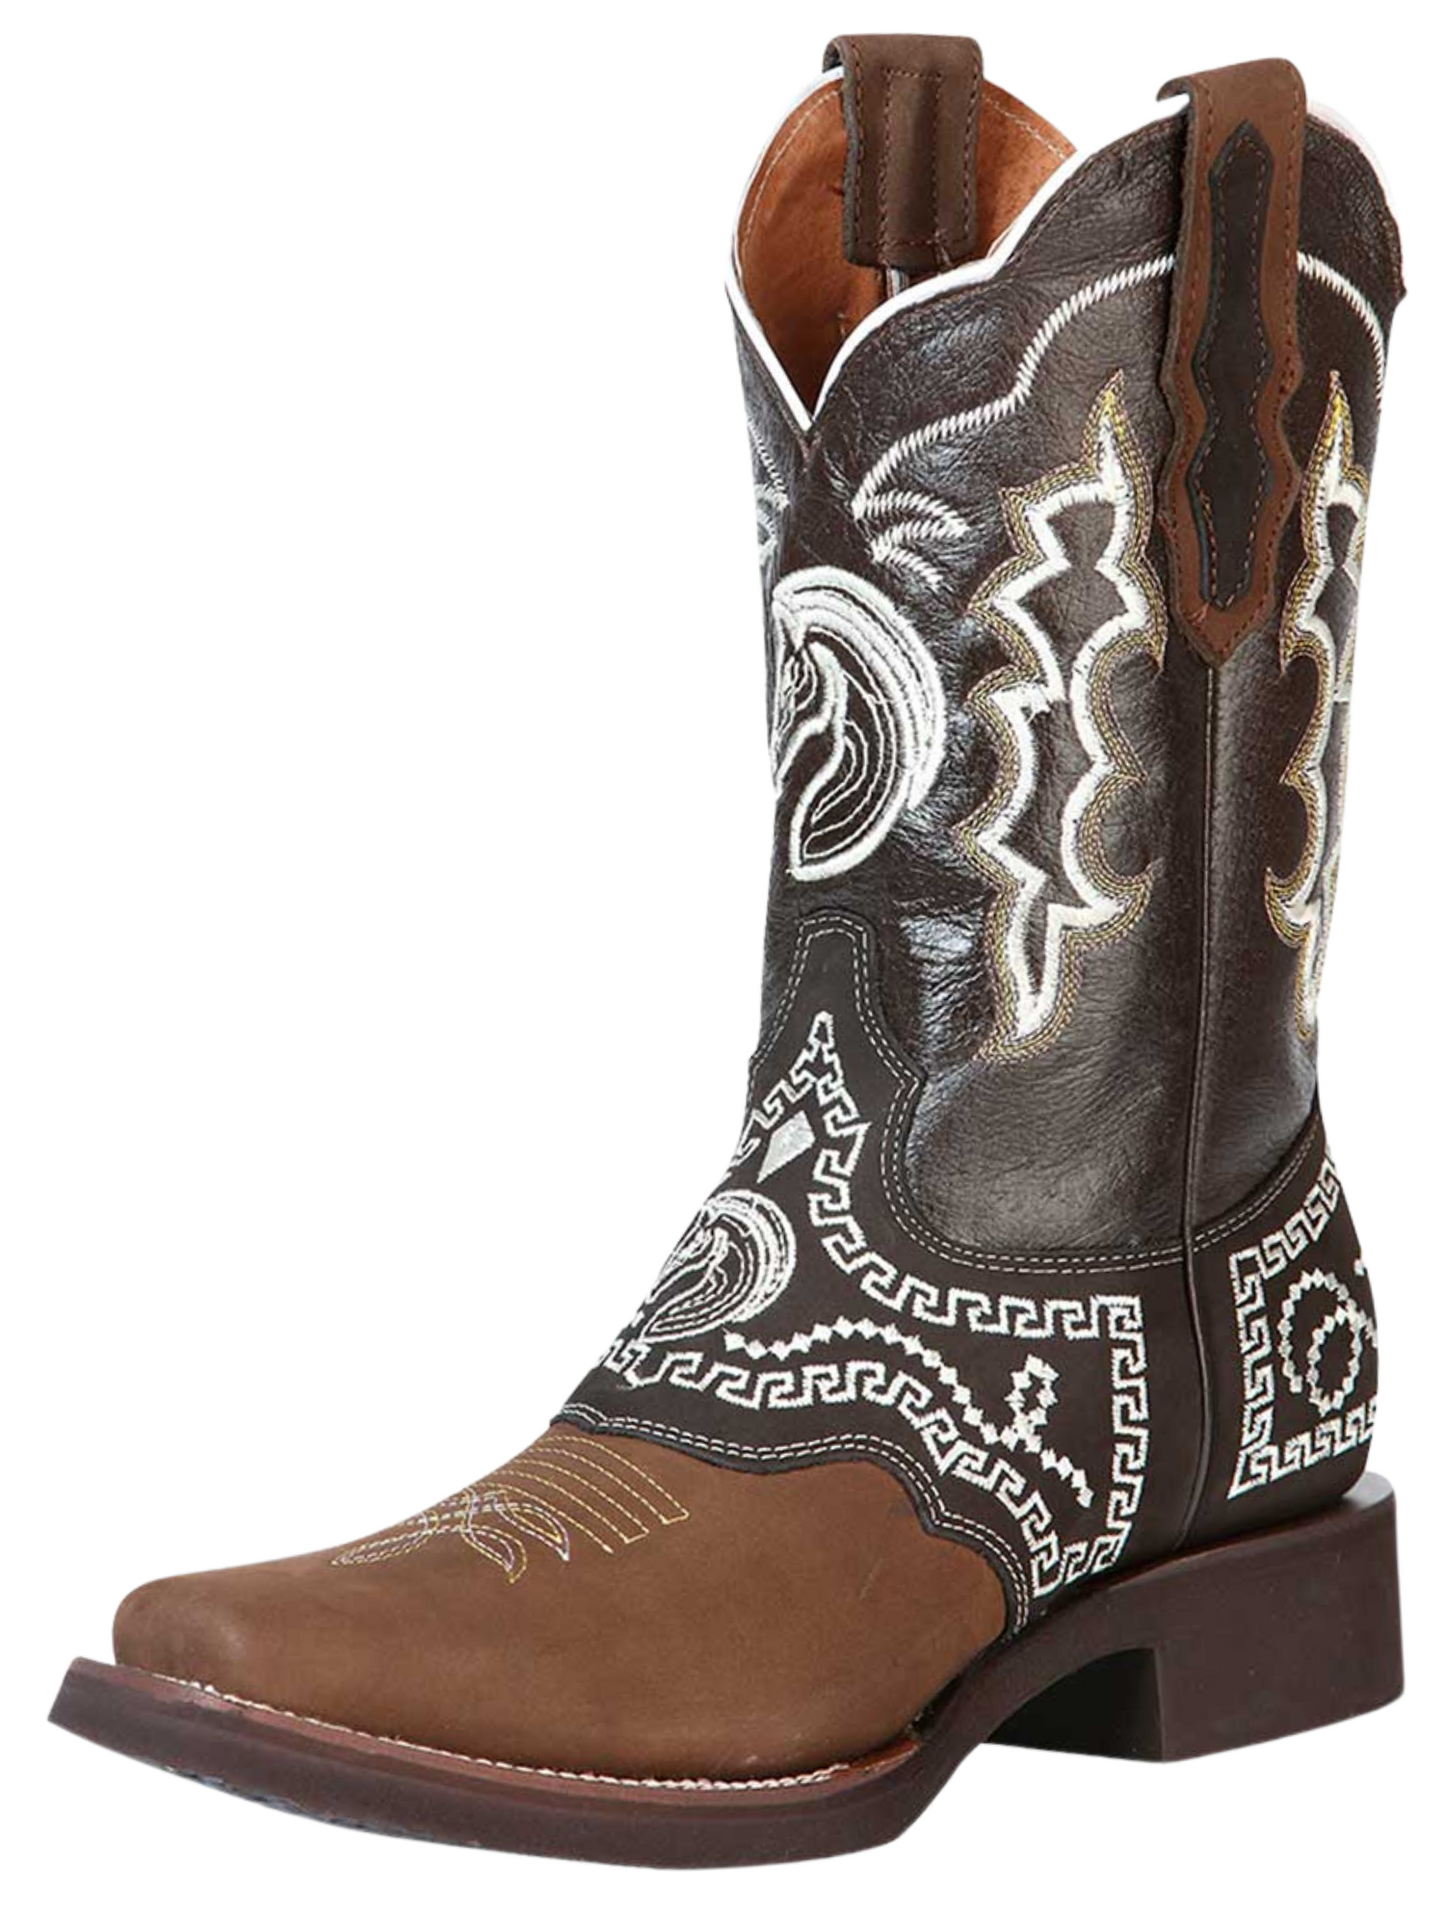 Rodeo Cowboy Boots with Embroidered Genuine Leather Mask for Men 'El General' - ID: 51117